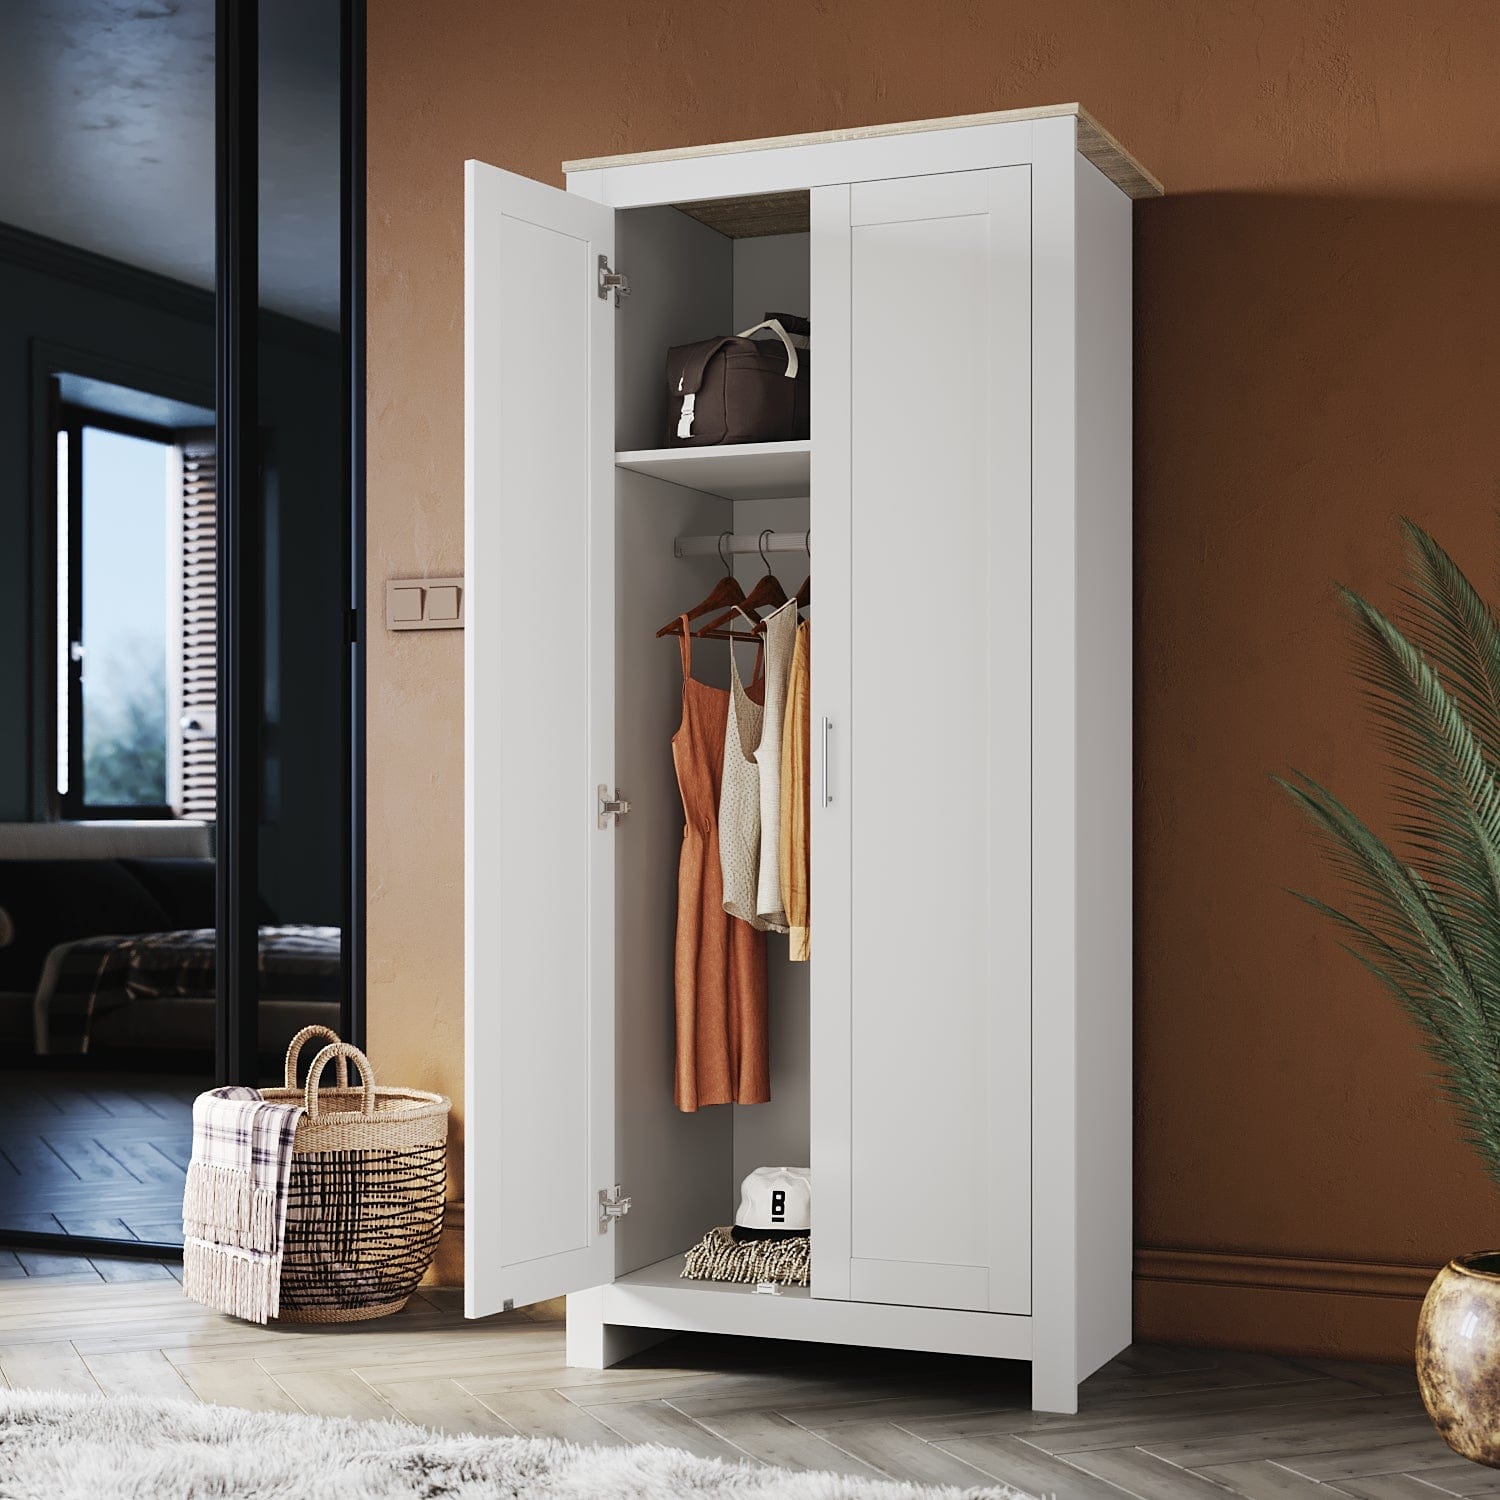 White Solid Wood Wardrobe with 2 Doors 180cm Clothes Closet for Hanging Clothes - Elegantshowers